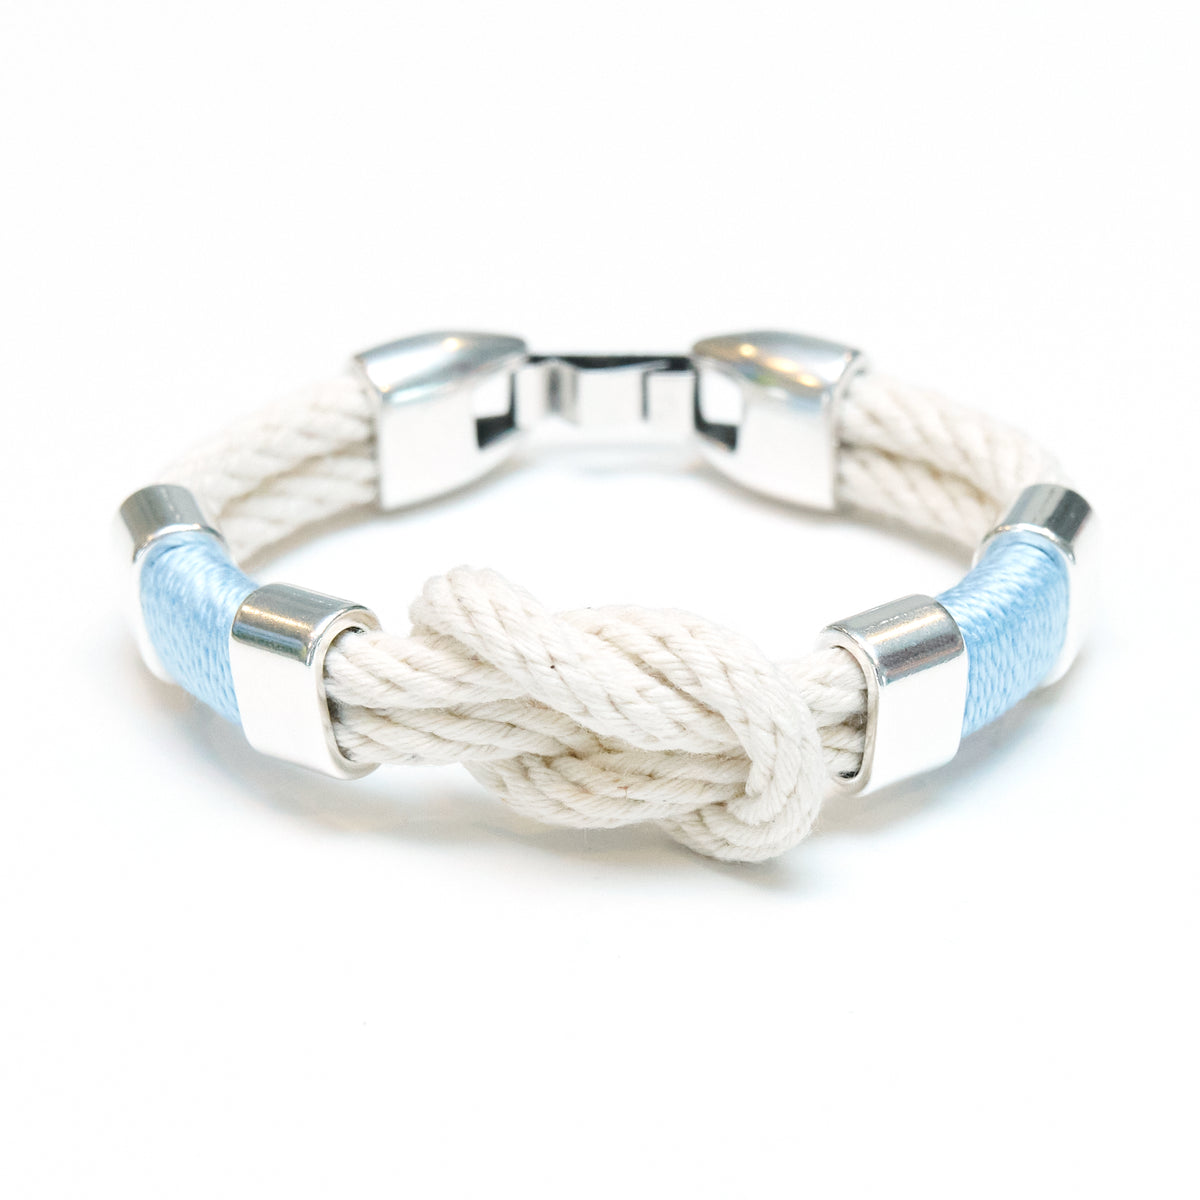 Starboard - Ivory/Light Blue/Silver